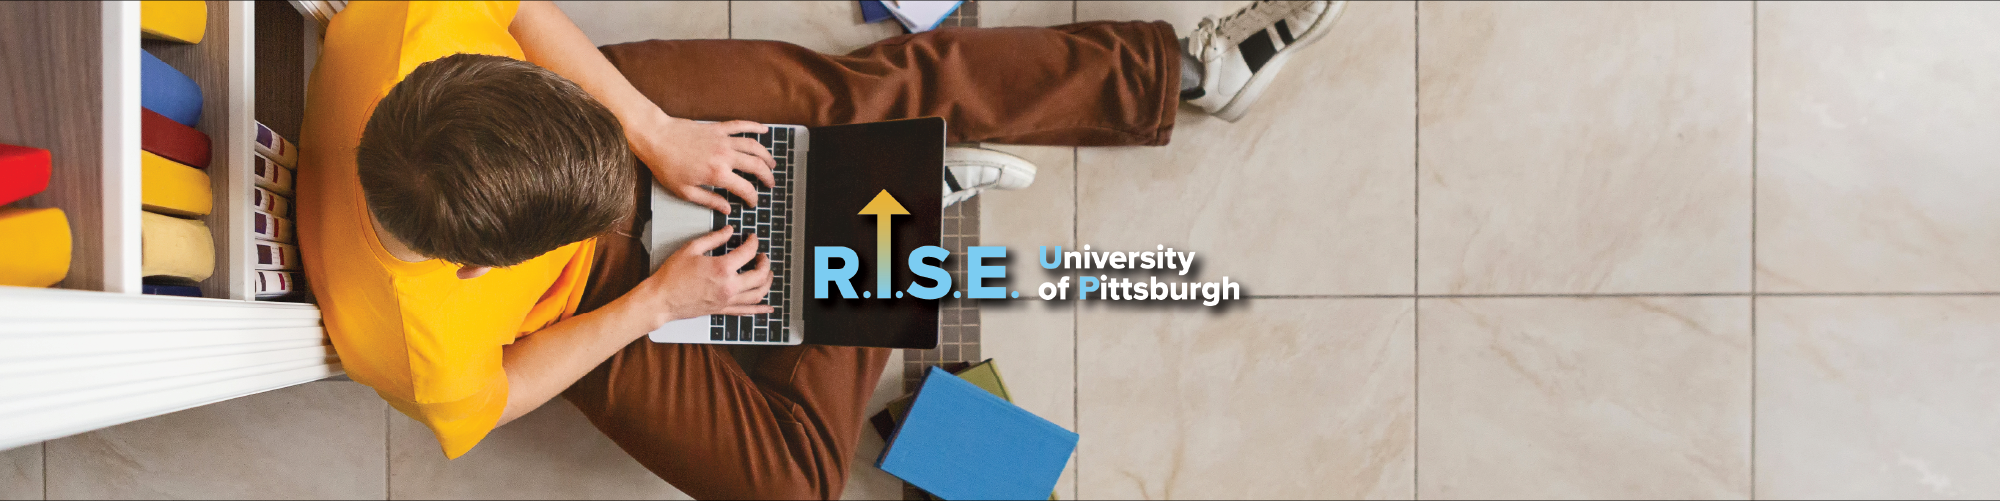 rise up banner image of student working at laptop